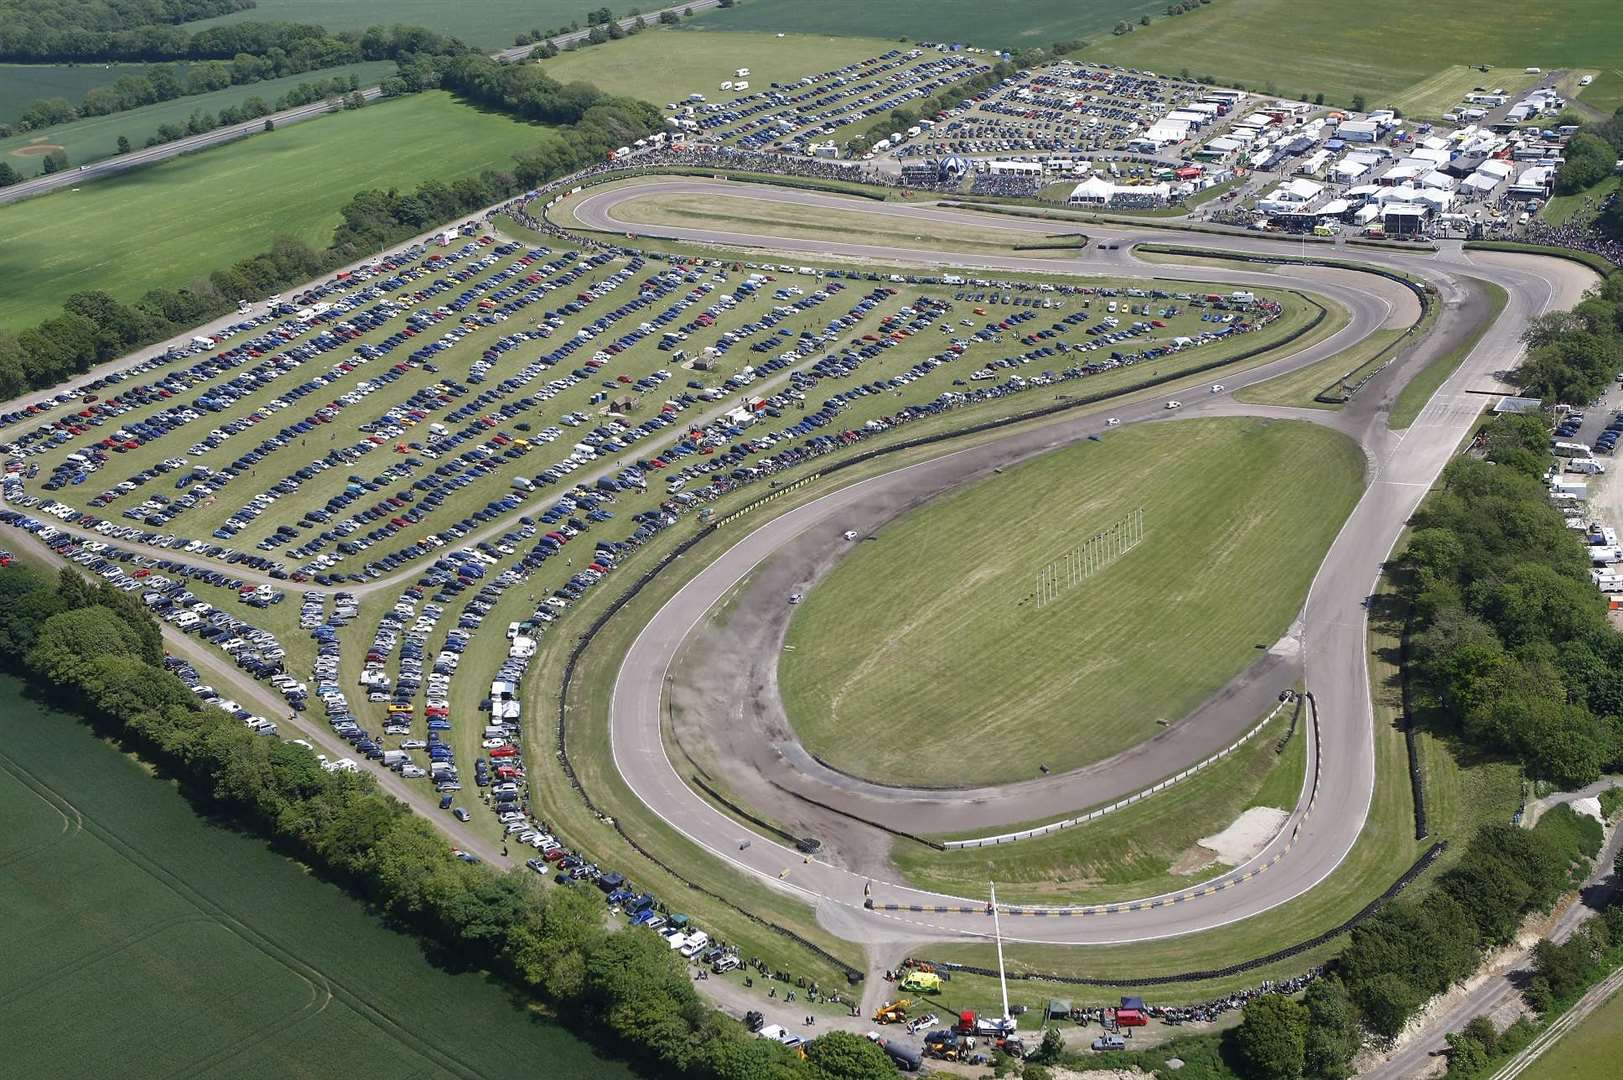 A packed Lydden Hill during the FIA World Rallycross Championship round in May 2014. Picture: Matt Bristow